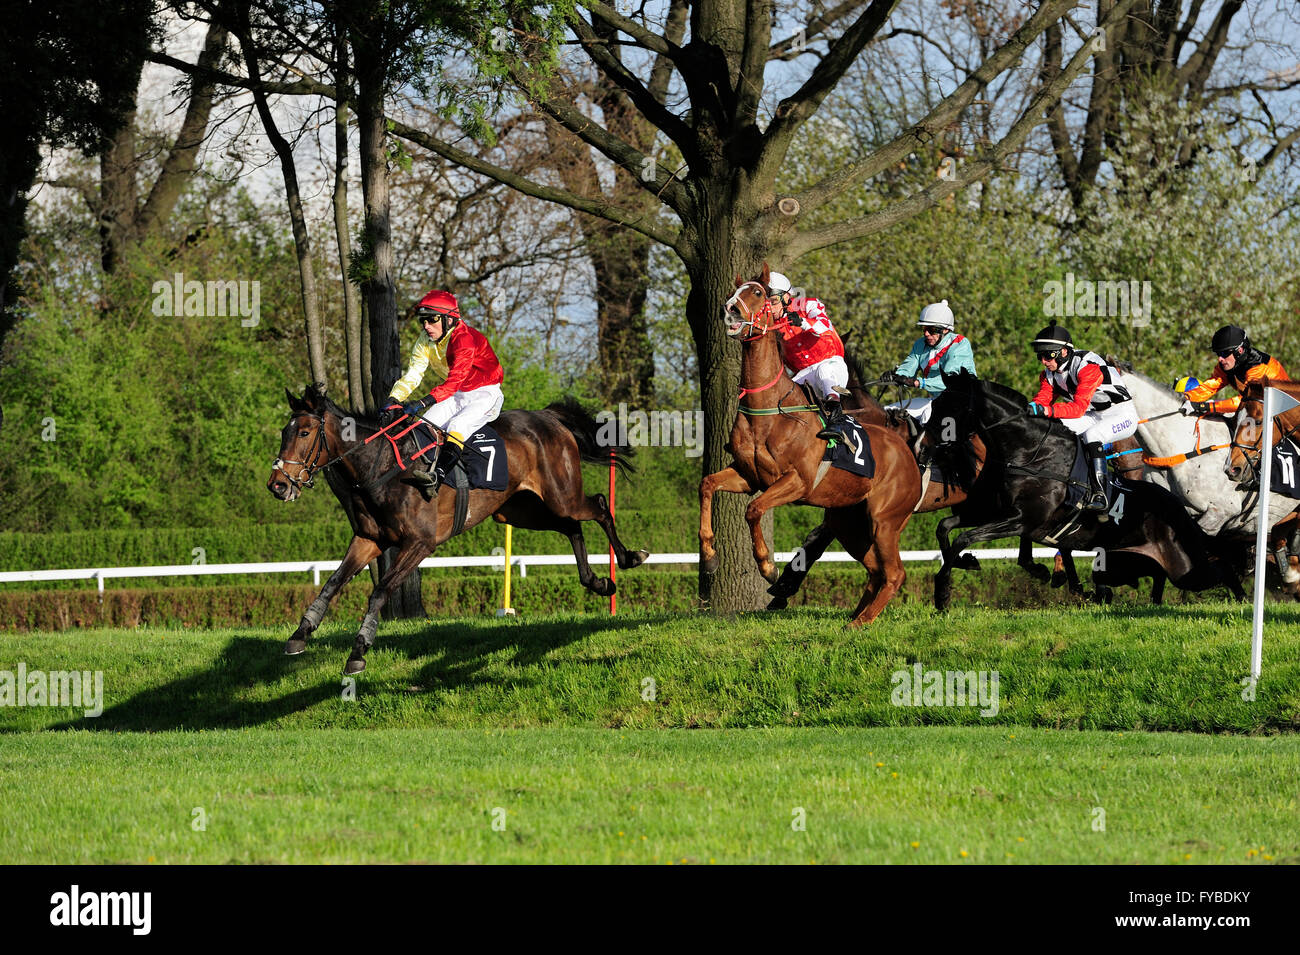 Poland. 24th April, 2016. Racing, horse, Partynice Wroclaw, Poland, Open Season 2016, wroclaw, dolnoslaskie, partynice, poland, europe, 24 april 2016, © Kazimierz Jurewicz/Alamy Live News, A'latune best, With two horses coach Emil Zahariev better turned out to be bred in Bulgaria A'latune, which under Alexander Kabardovem won the duel debutants. Shortly after her finish Fangoria (D. Andres) and Goddess (K. Maryniak). Racing, horse, Partynice Wroclaw, Poland, Open Season 2016, 24 april 2016, wroclaw, dolnoslaskie, partynice, poland, europe, Stock Photo